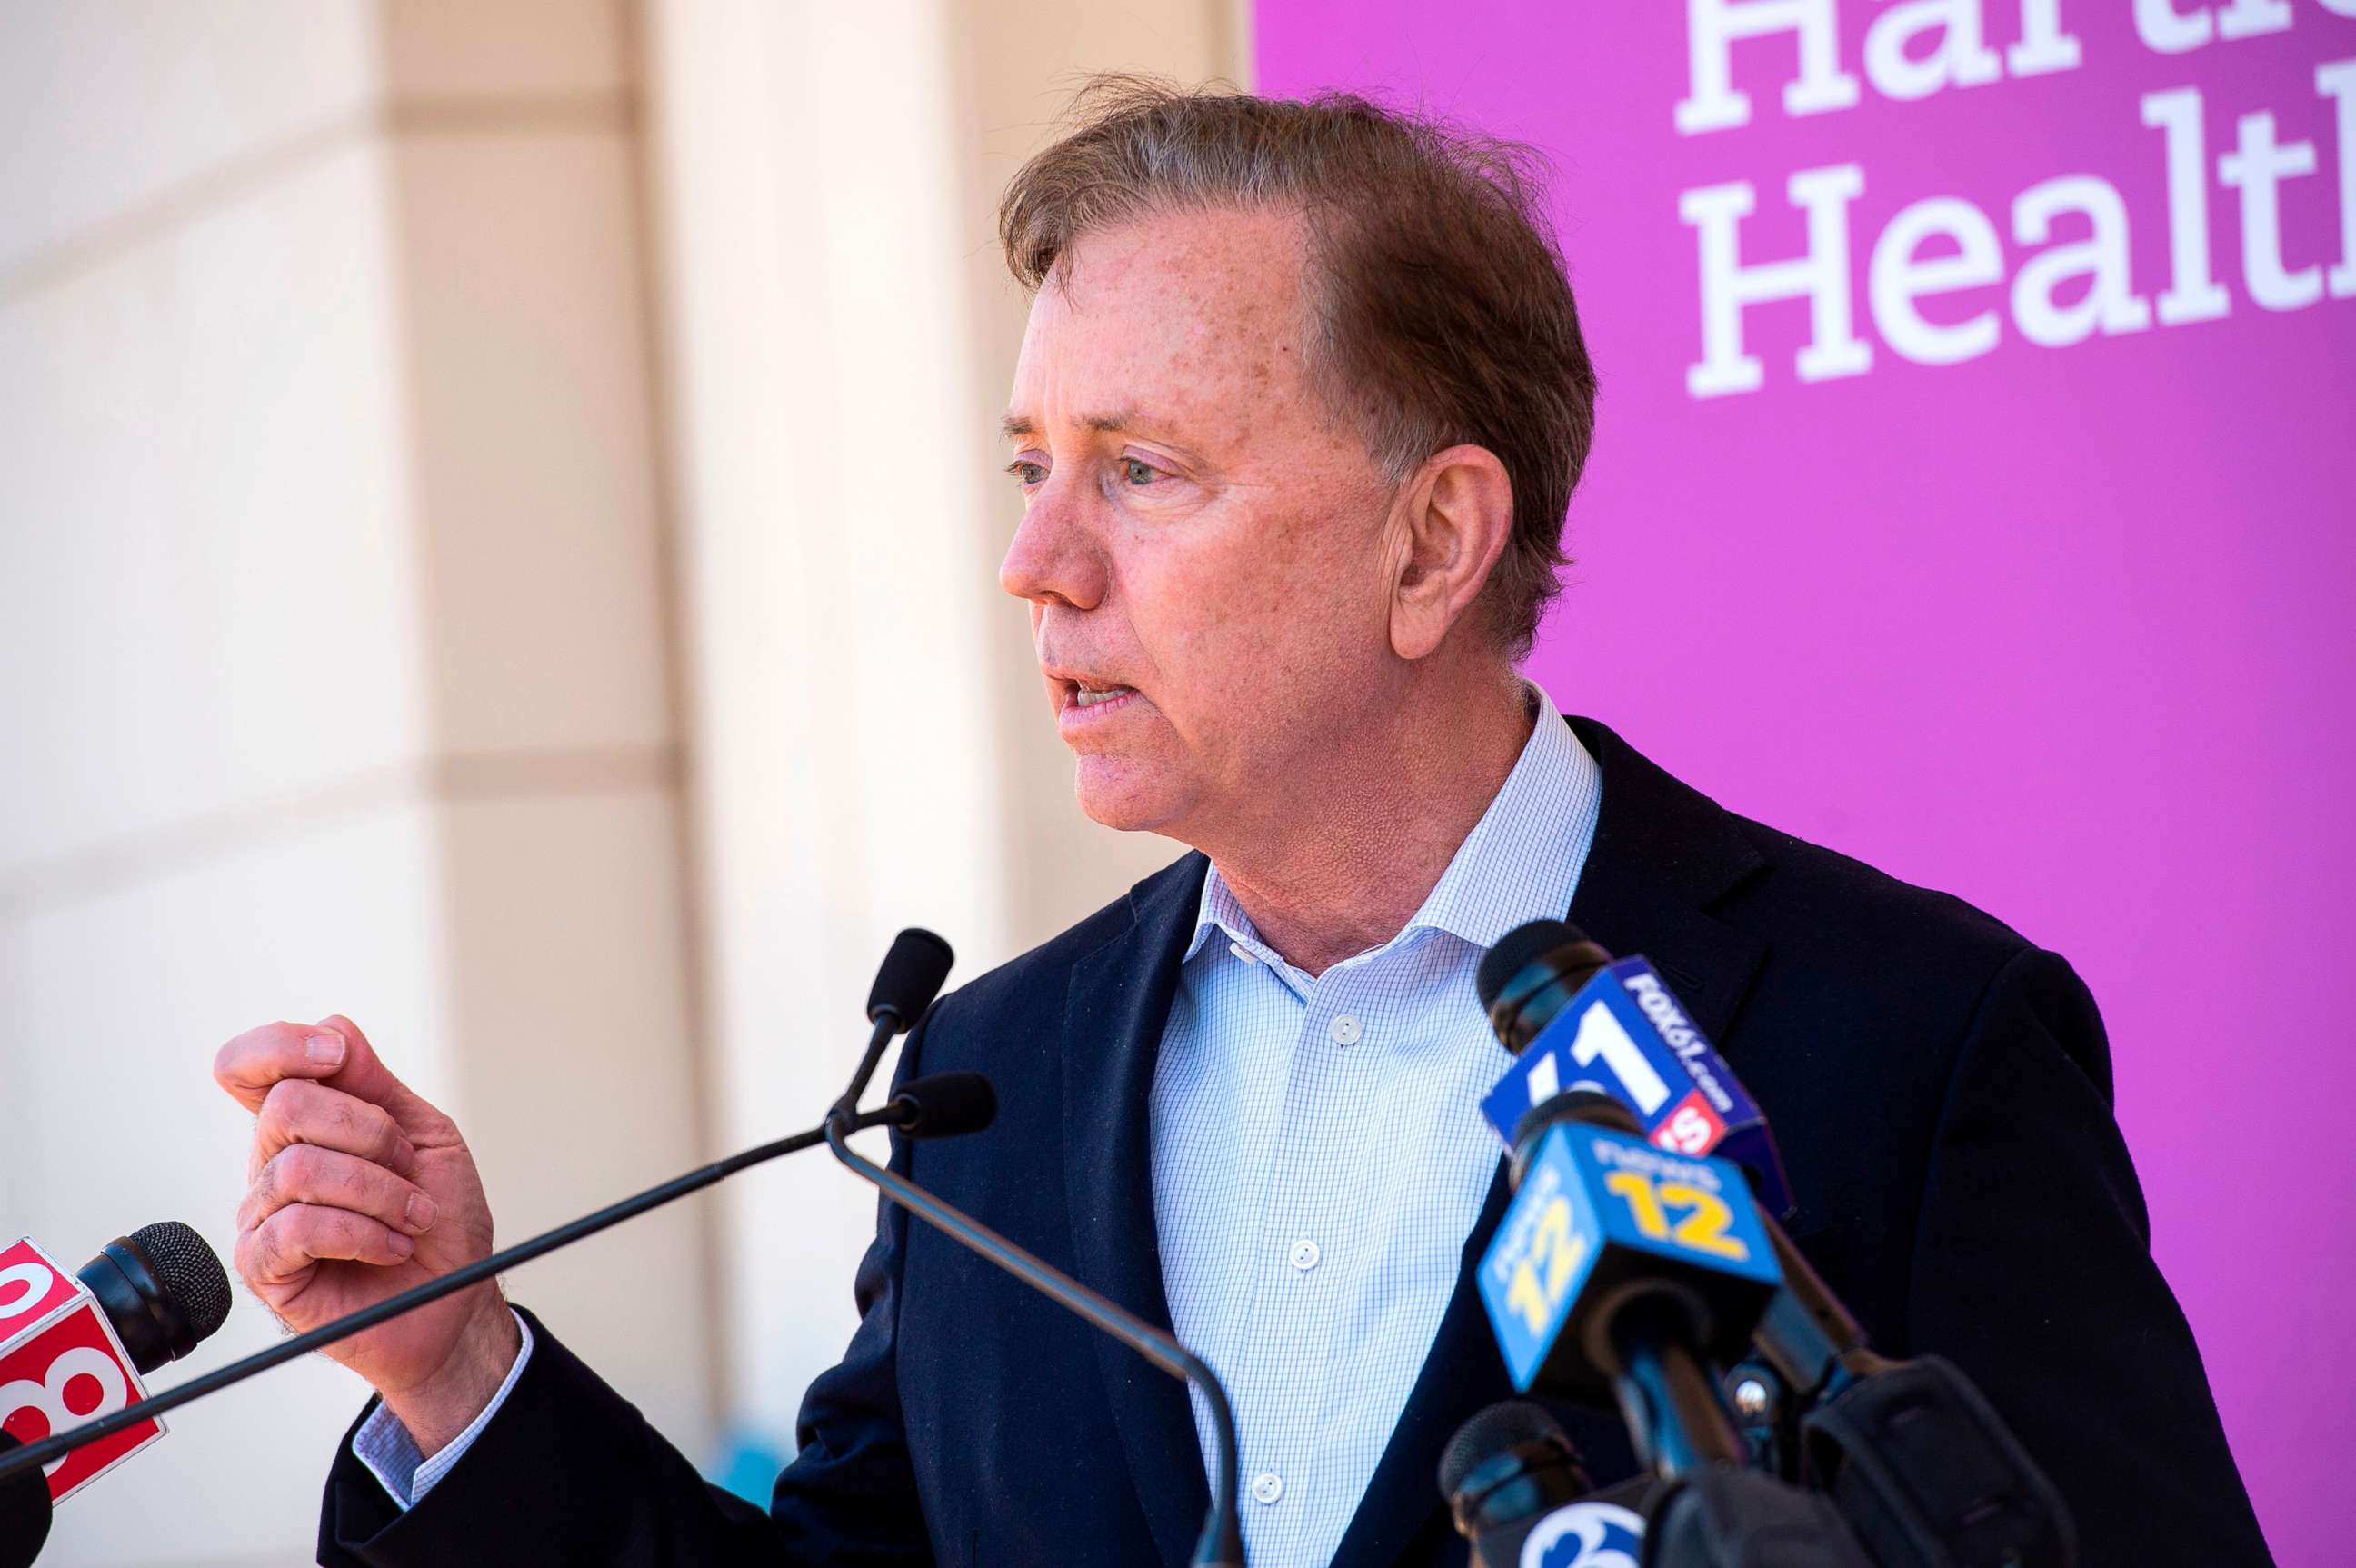 PHOTO: Gov. Ned Lamont Jr. speaks about Connecticut's efforts to get more people vaccinated at Hartford HealthCare St. Vincent's Medical Center in Bridgeport, Conn. on Feb. 26, 2021.